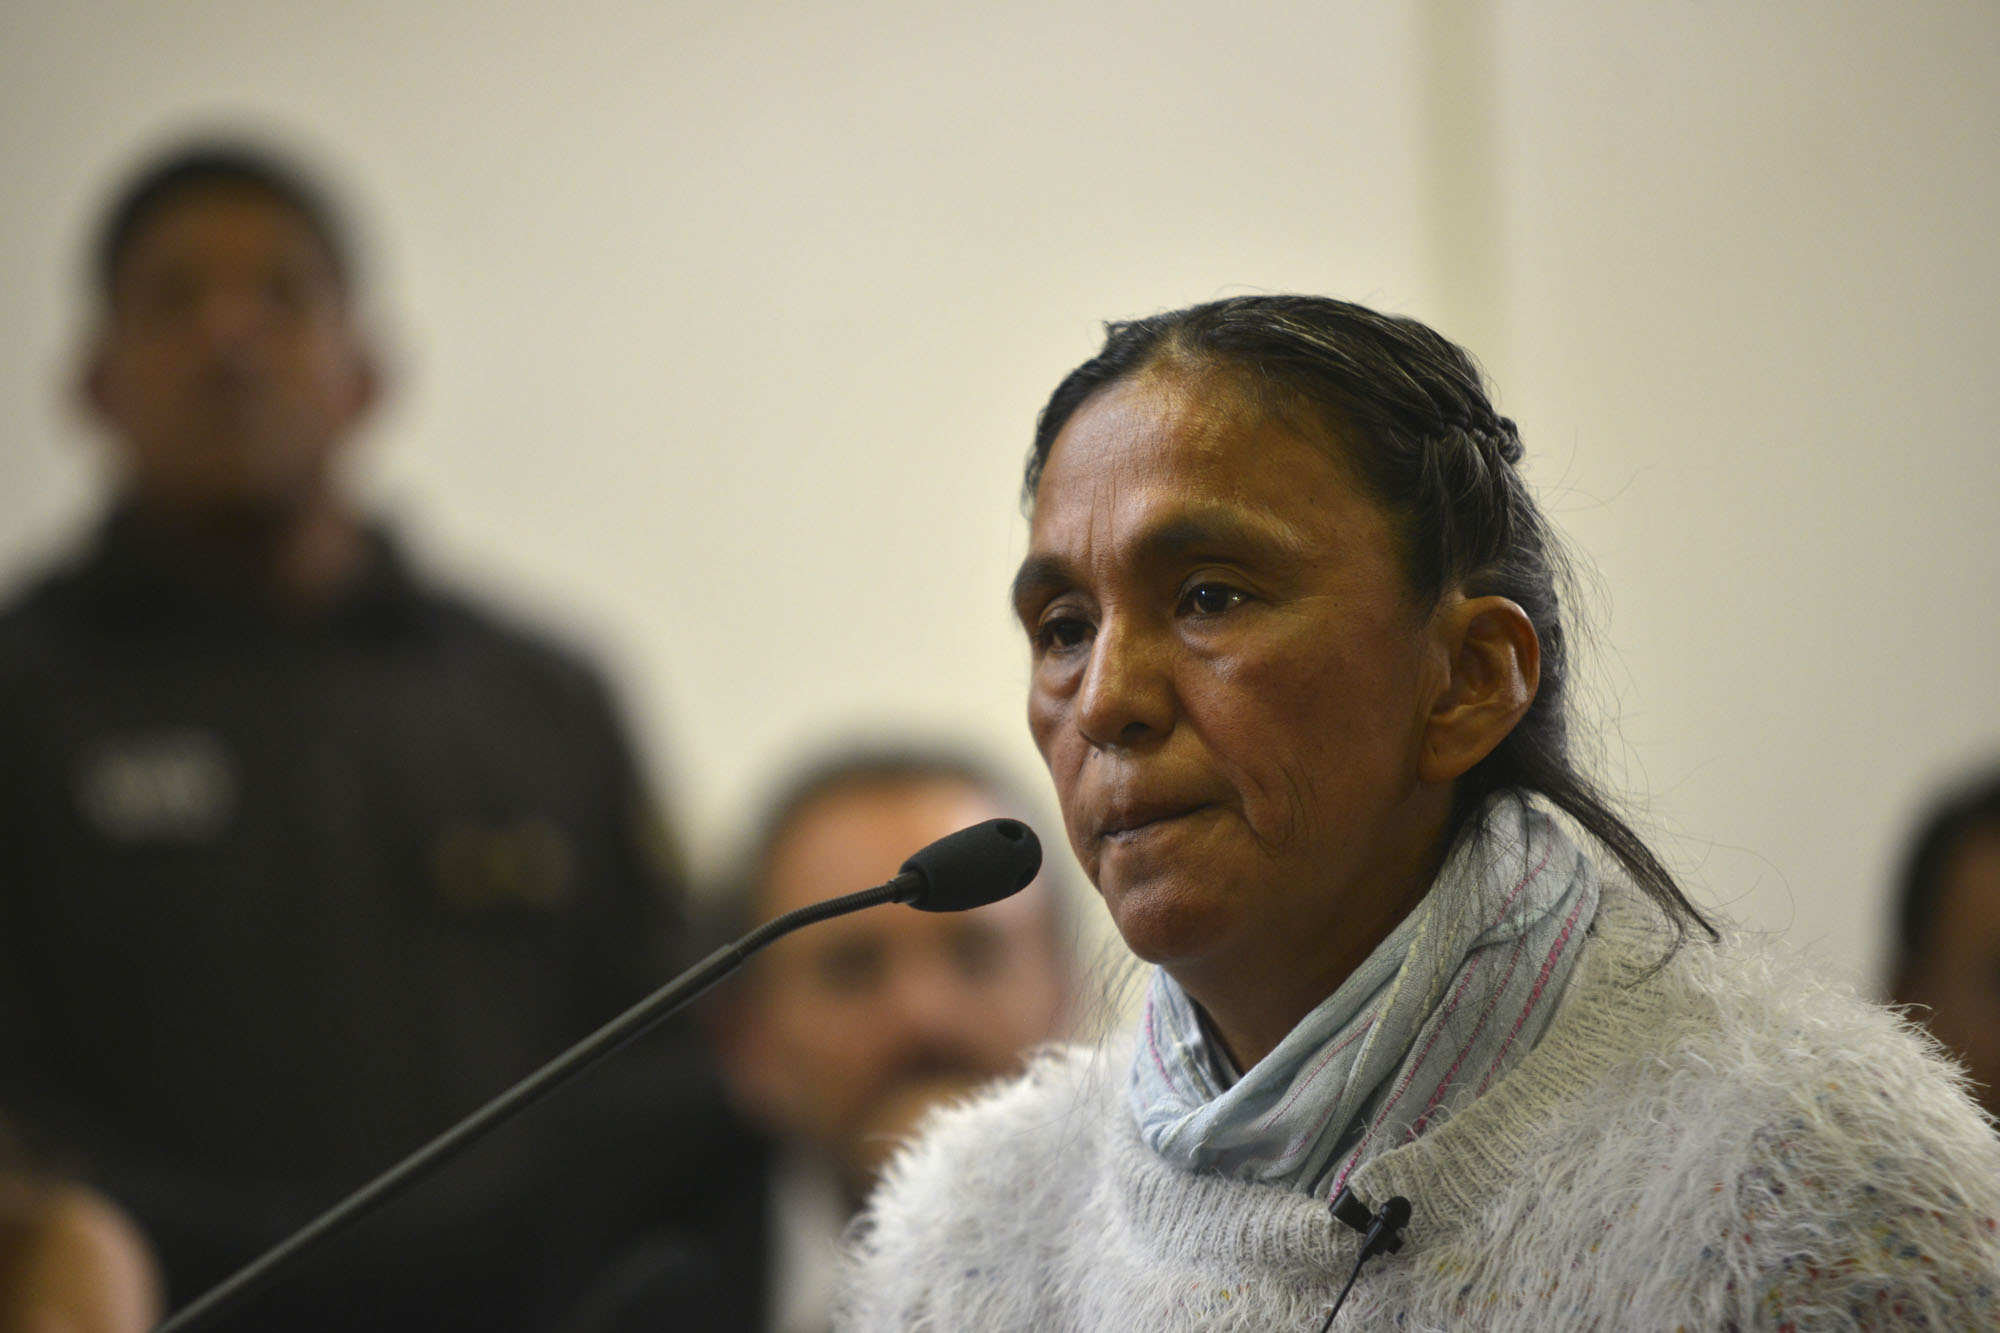 Milagro Sala was arrested last January for allegedly mishandling funds and has been in jail ever since.